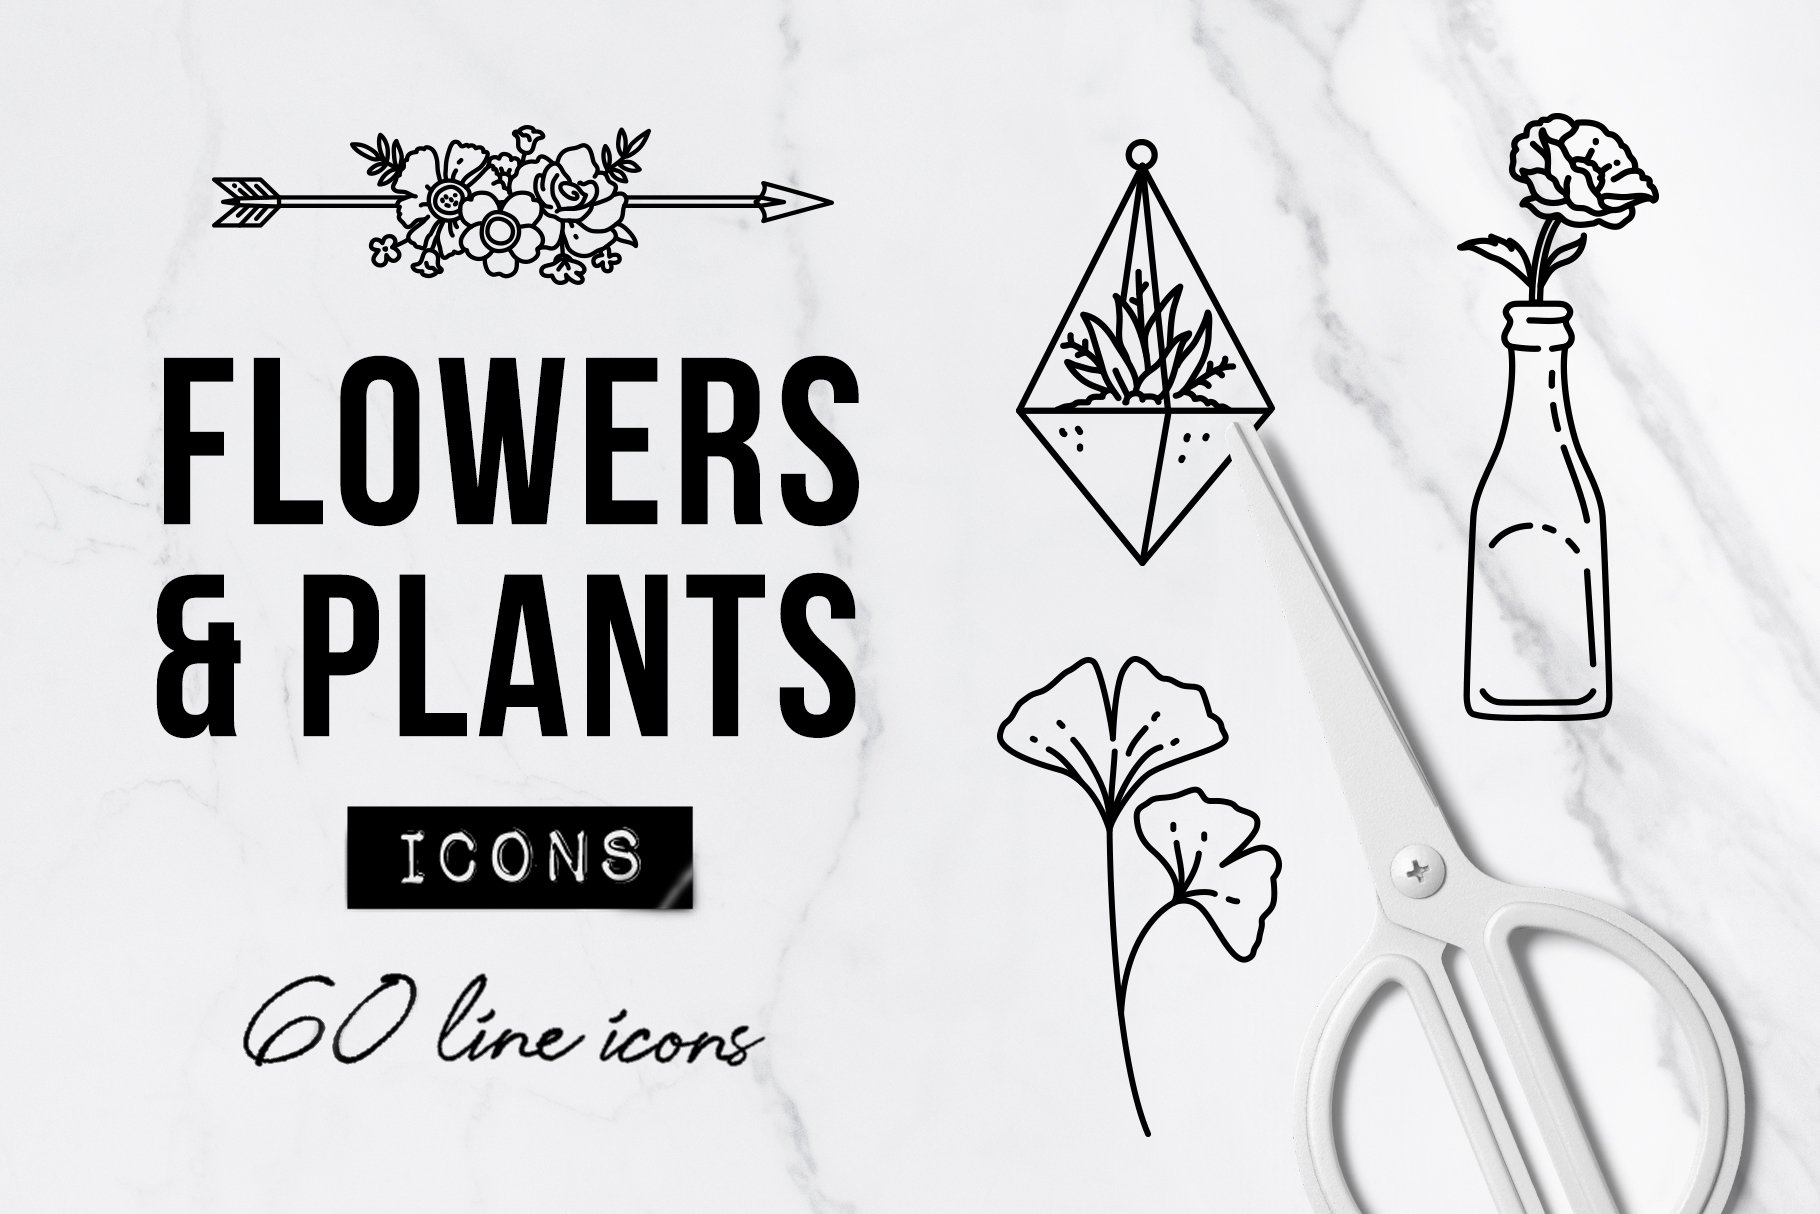 60 Plant & Floral Icons - Flower cover image.